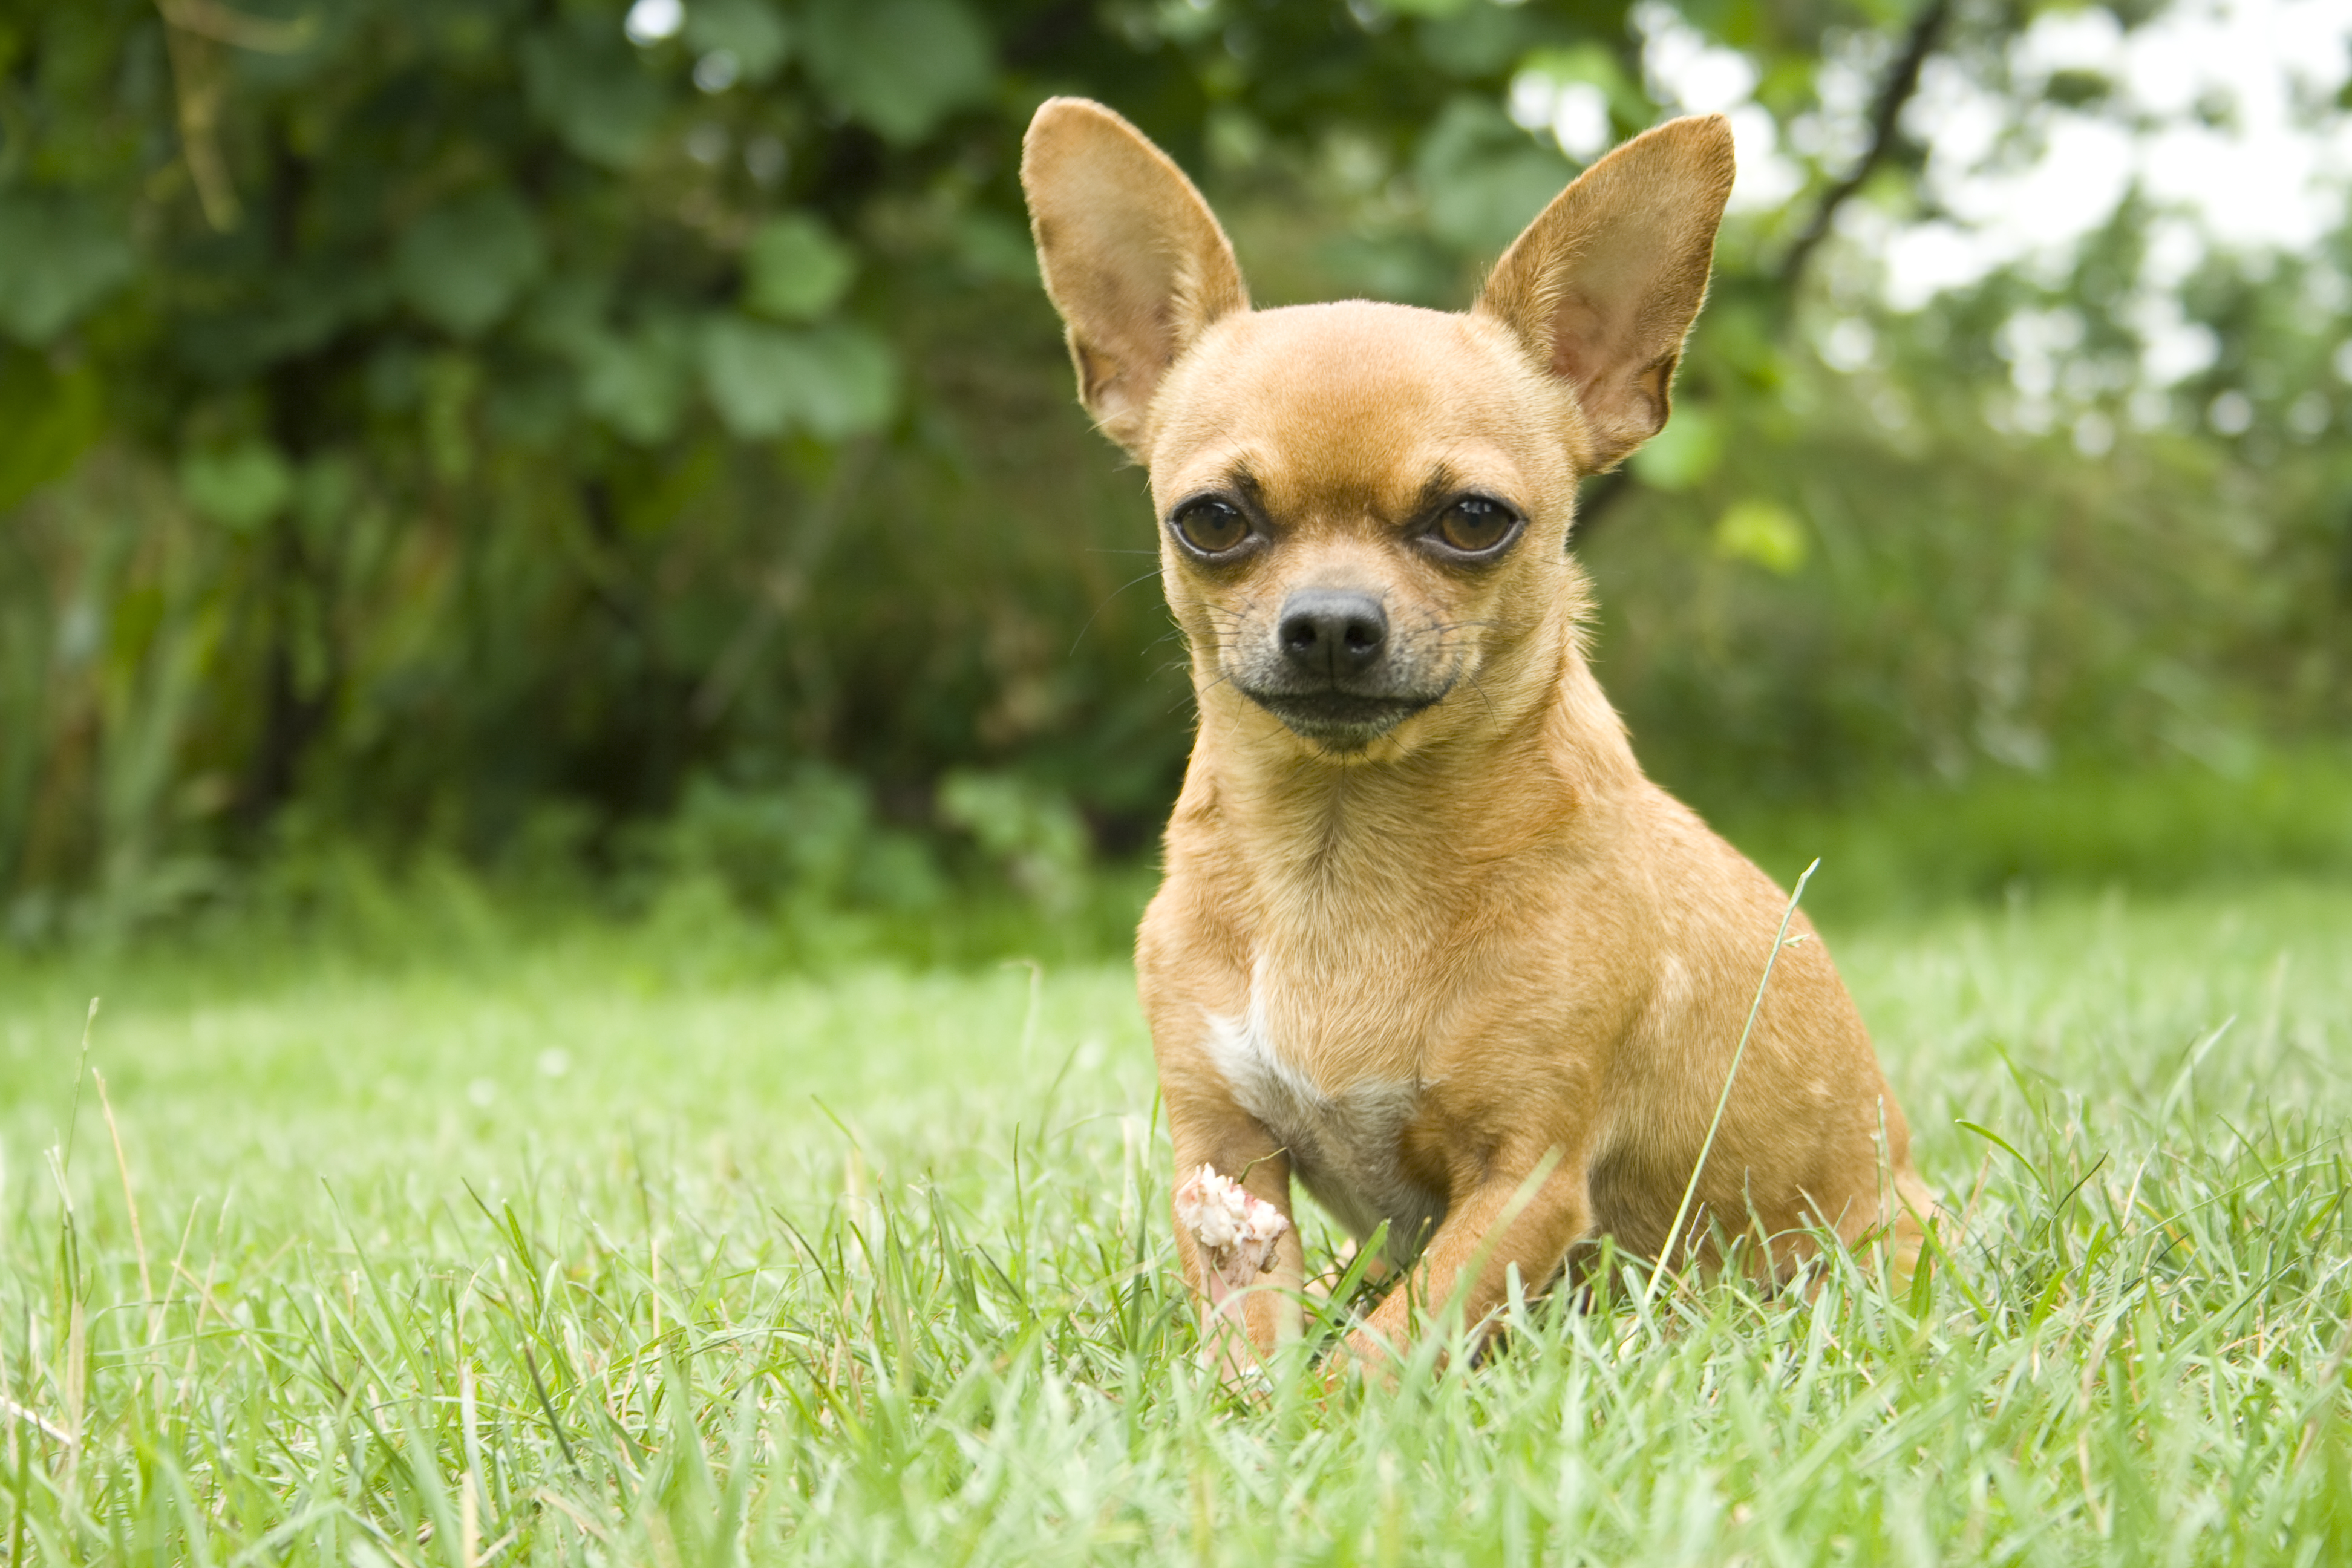 how old is a chihuahua full grown